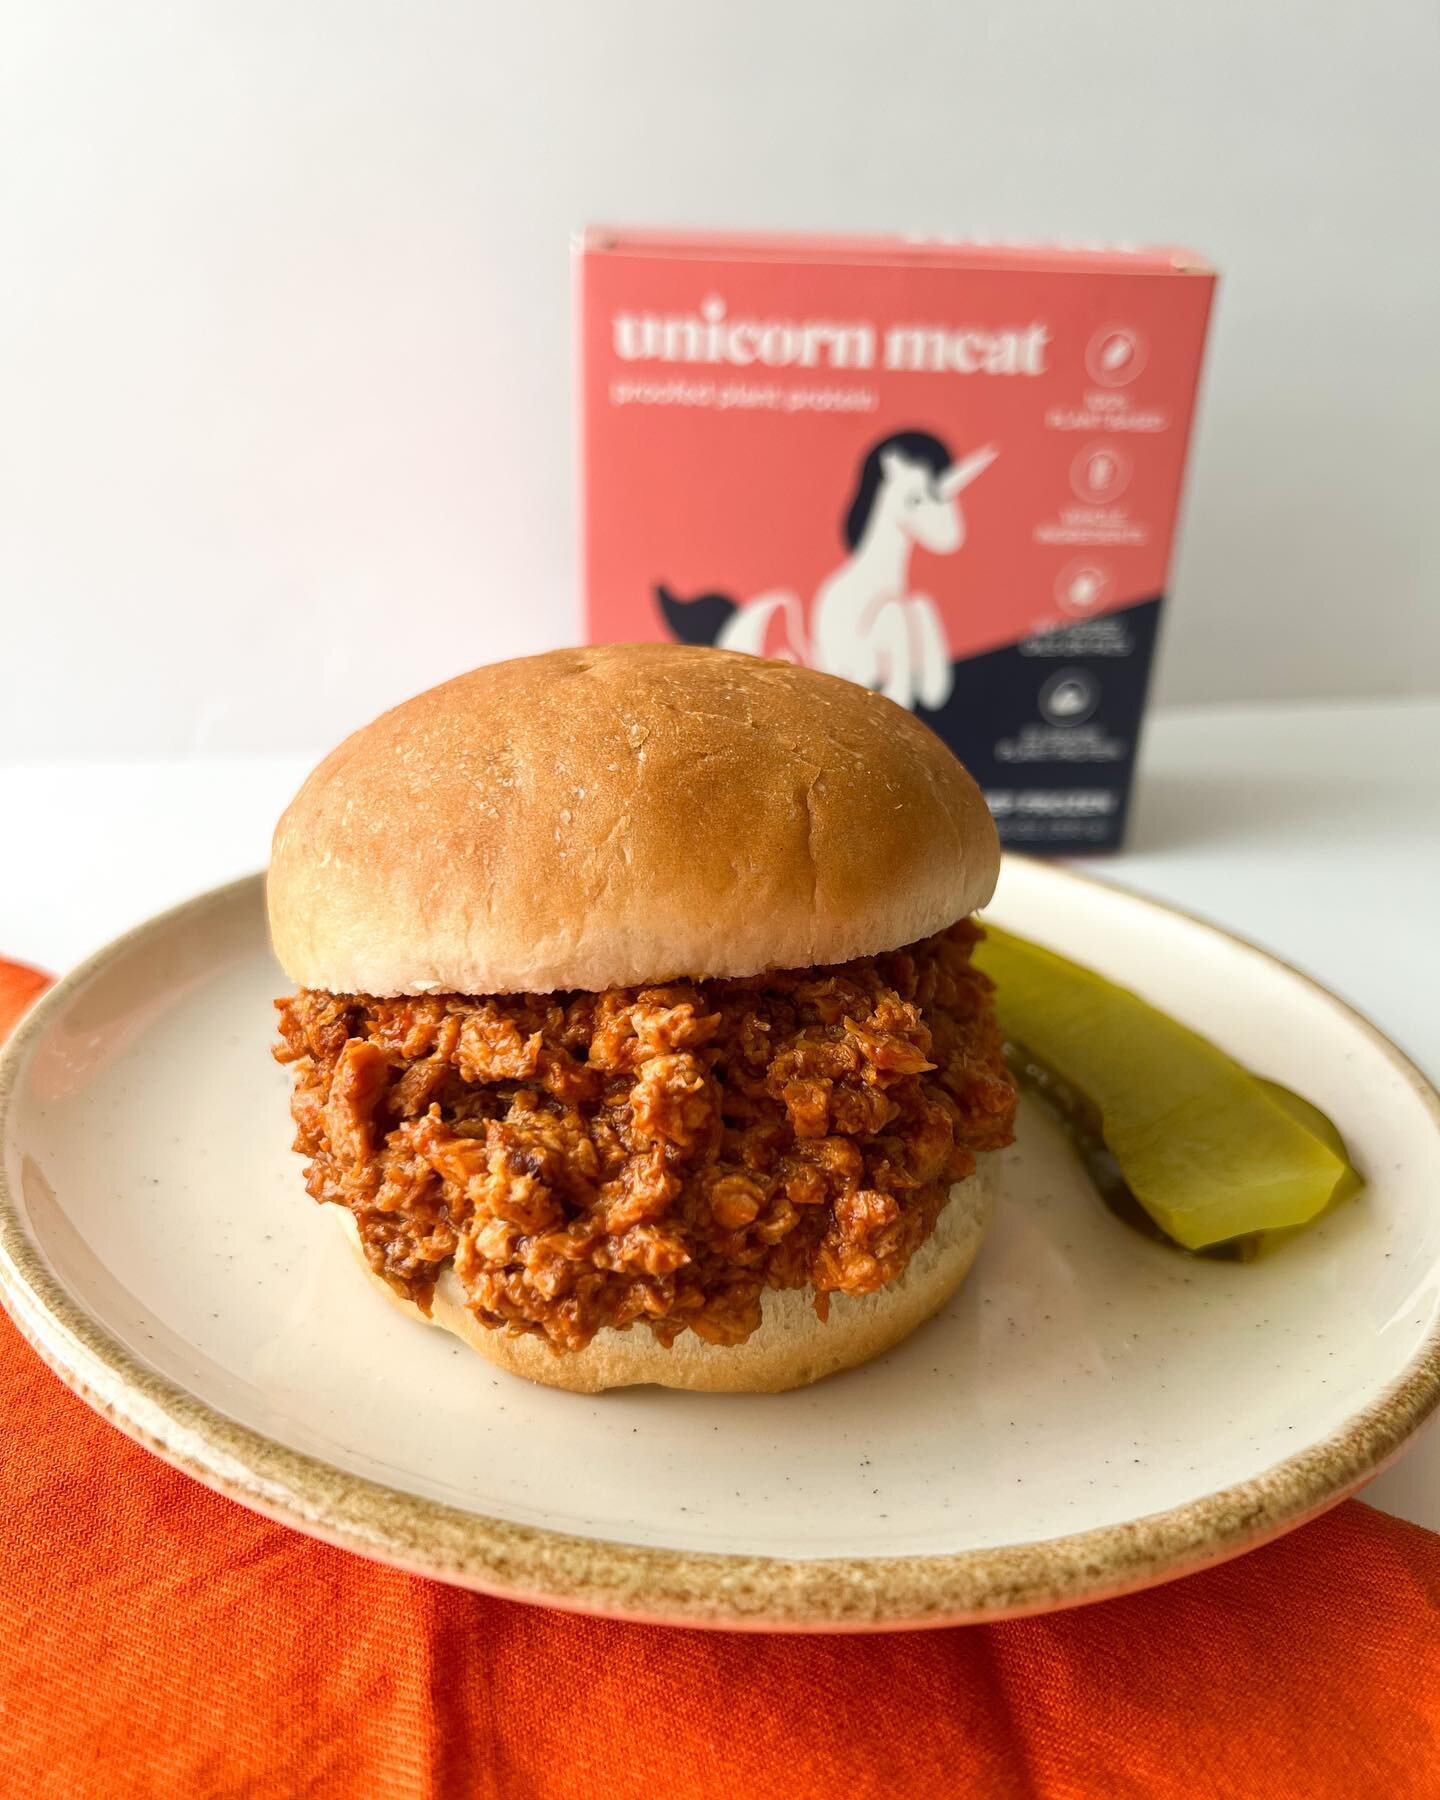 It&rsquo;s #nationalsloppyjoe day and we&rsquo;re drooling over this Unicorn Meat version 🤤🦄
&bull;
&bull;
&bull;
&bull;
#UnicornMeat #EatMoreUnicorns #vegansf #plantbasedsf #veganberkeley #veganbayarea #bayarea #plantbasedfood #plantbased #vegan #